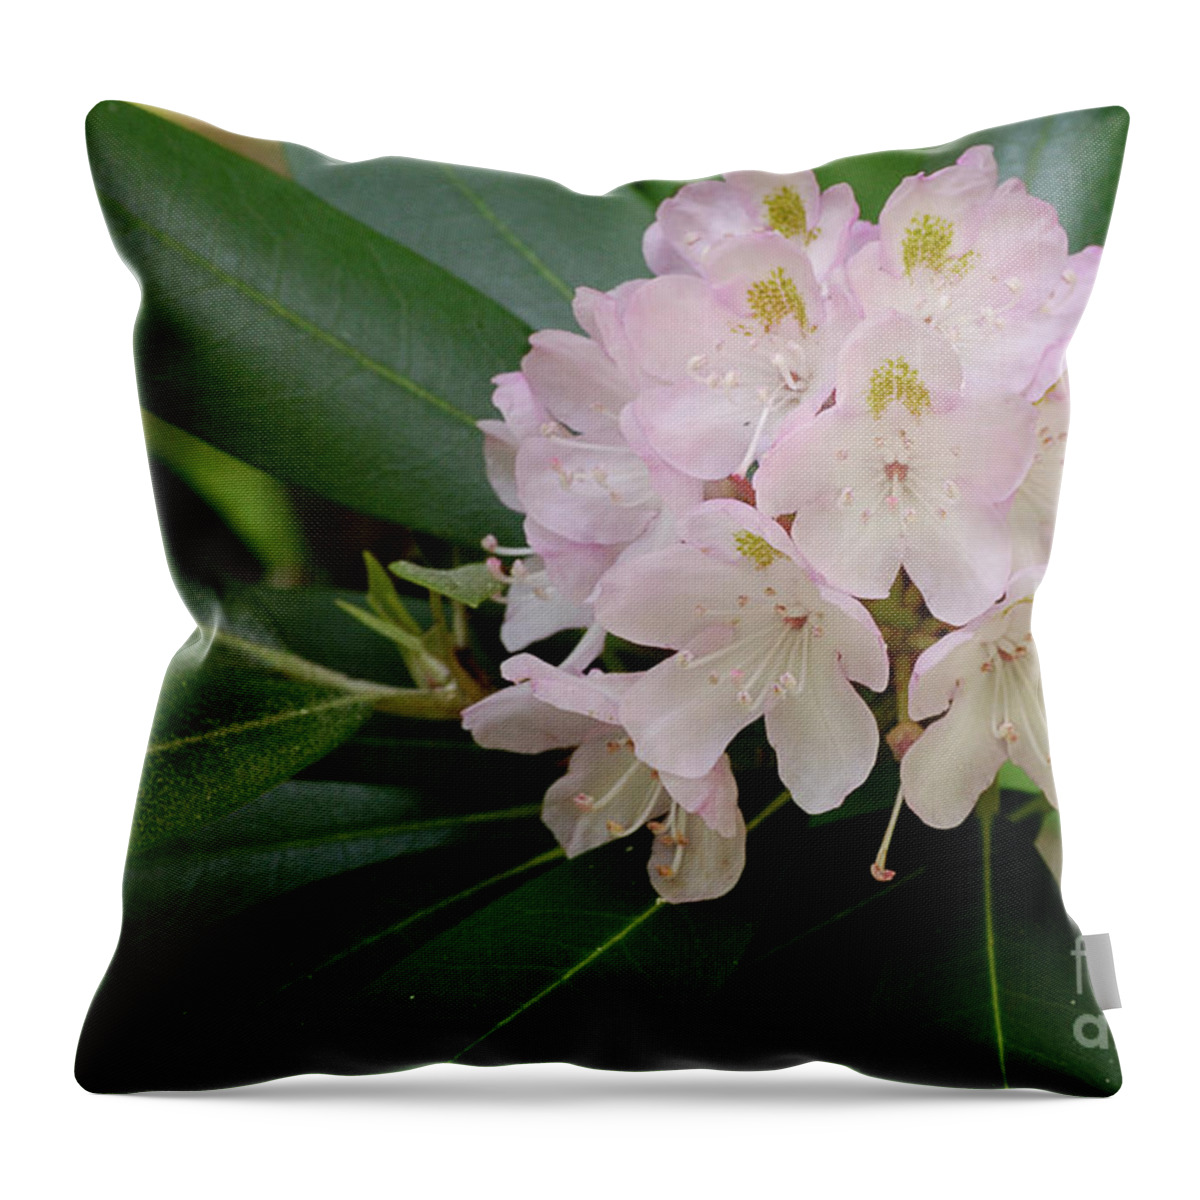 High Virginia Images Throw Pillow featuring the photograph Tucker County Rhododendron by Randy Bodkins